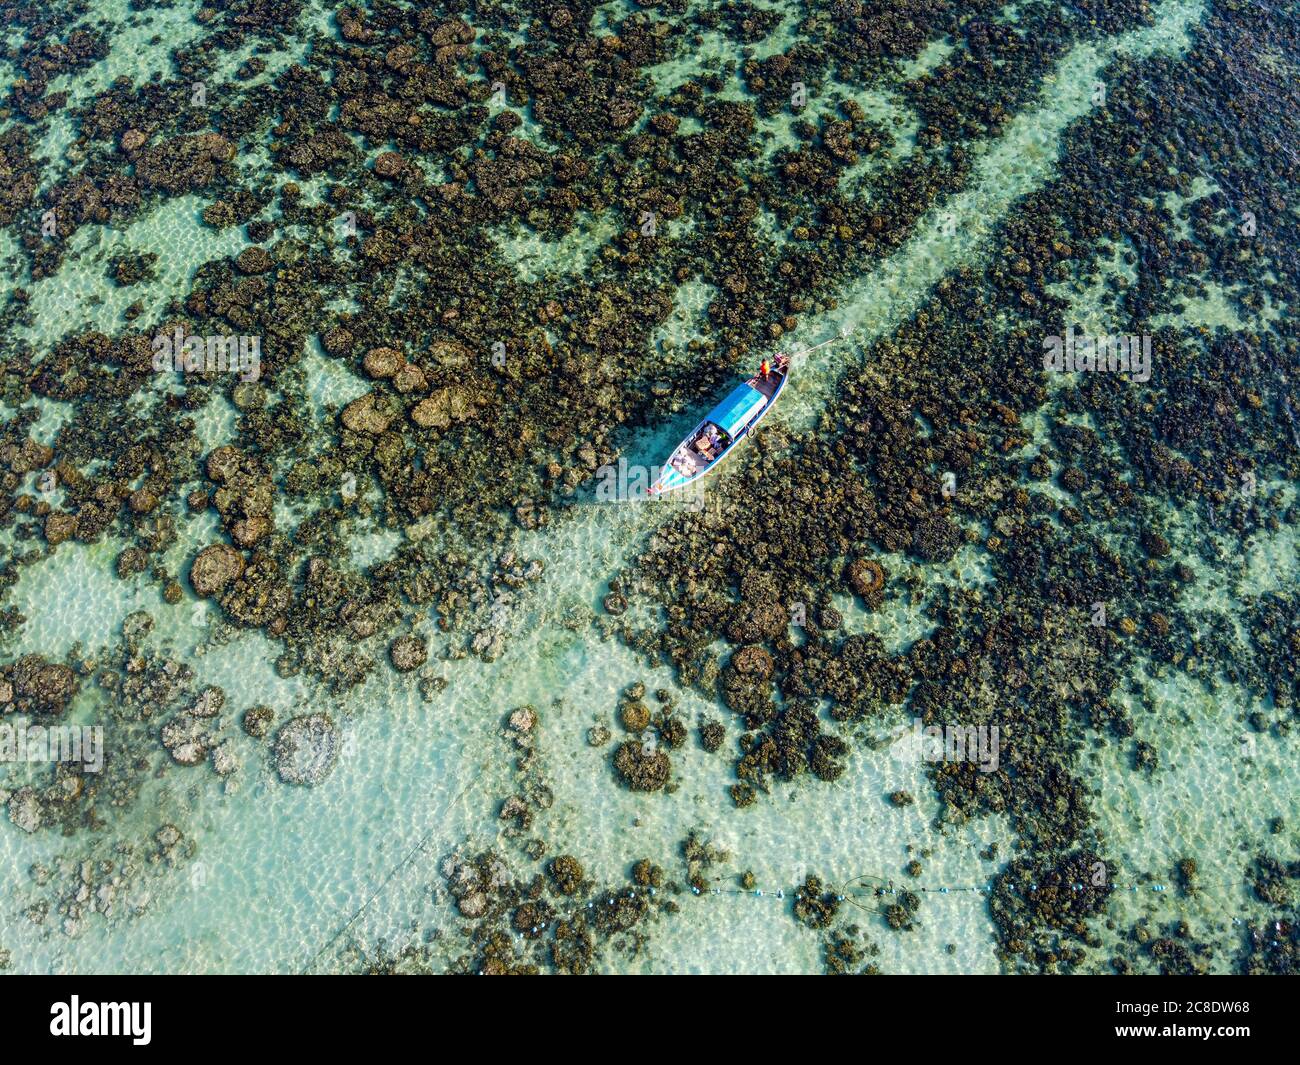 Thailand, Satun Province, Ko Lipe, Aerial view of fishing boat moored at rocky shore Stock Photo